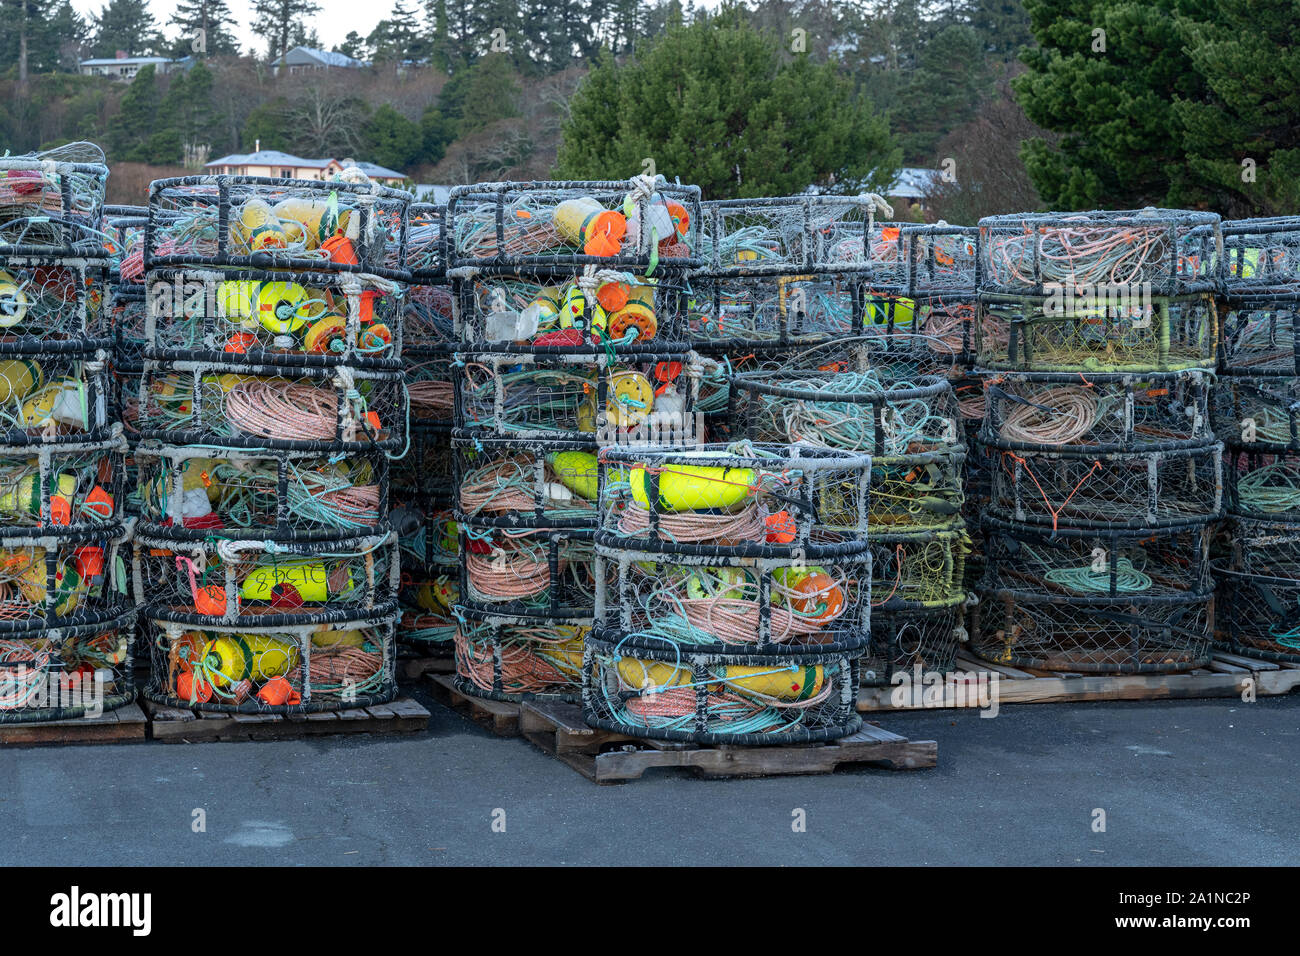 Crab traps, pots and floats, stacked on wharf,Yaquina Bay, Newport Oregon Stock Photo